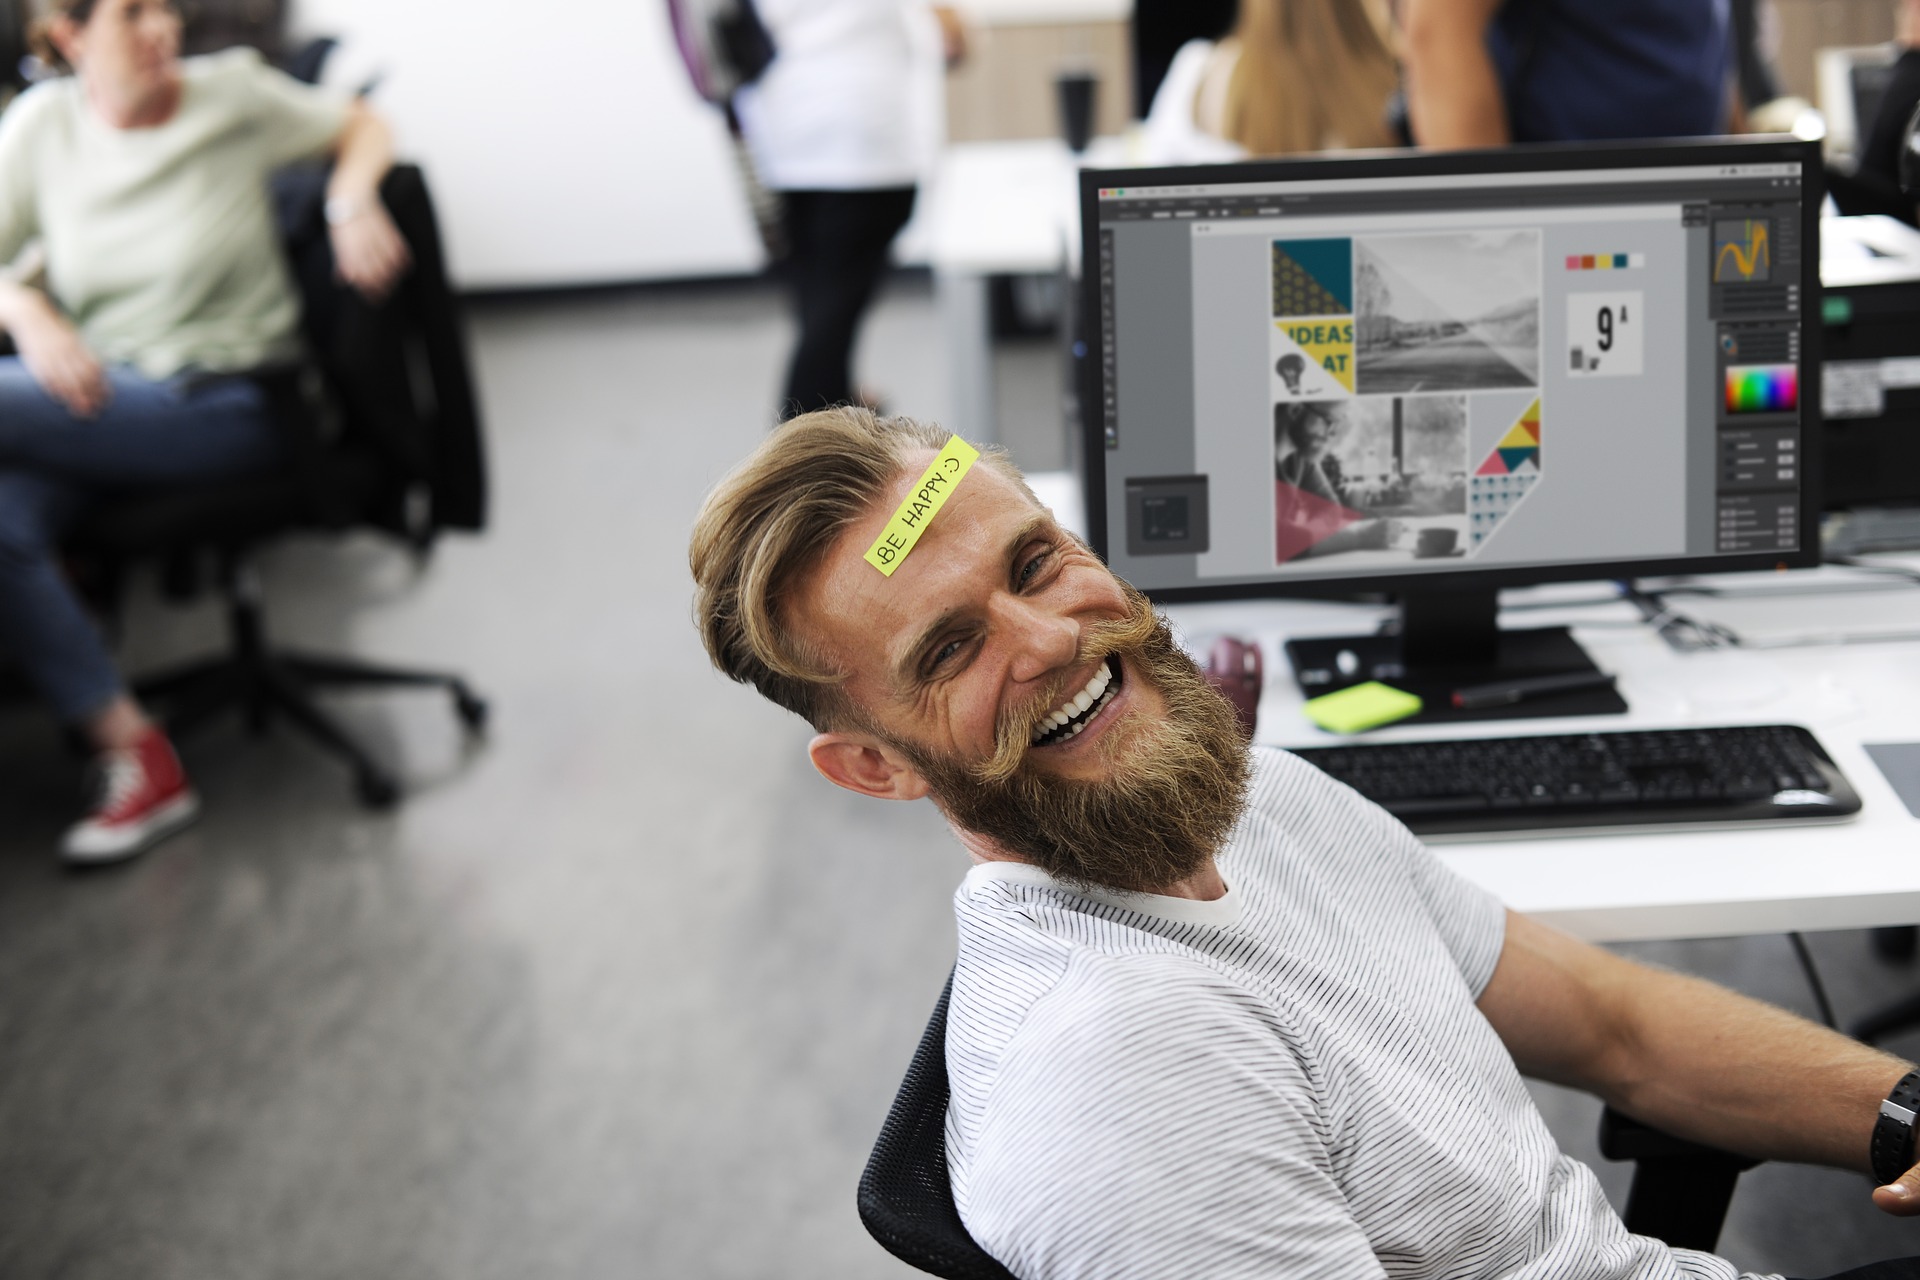 A smiling man sitting at a computer desk. He has a sticky note on his forehead that reads "Be Happy"